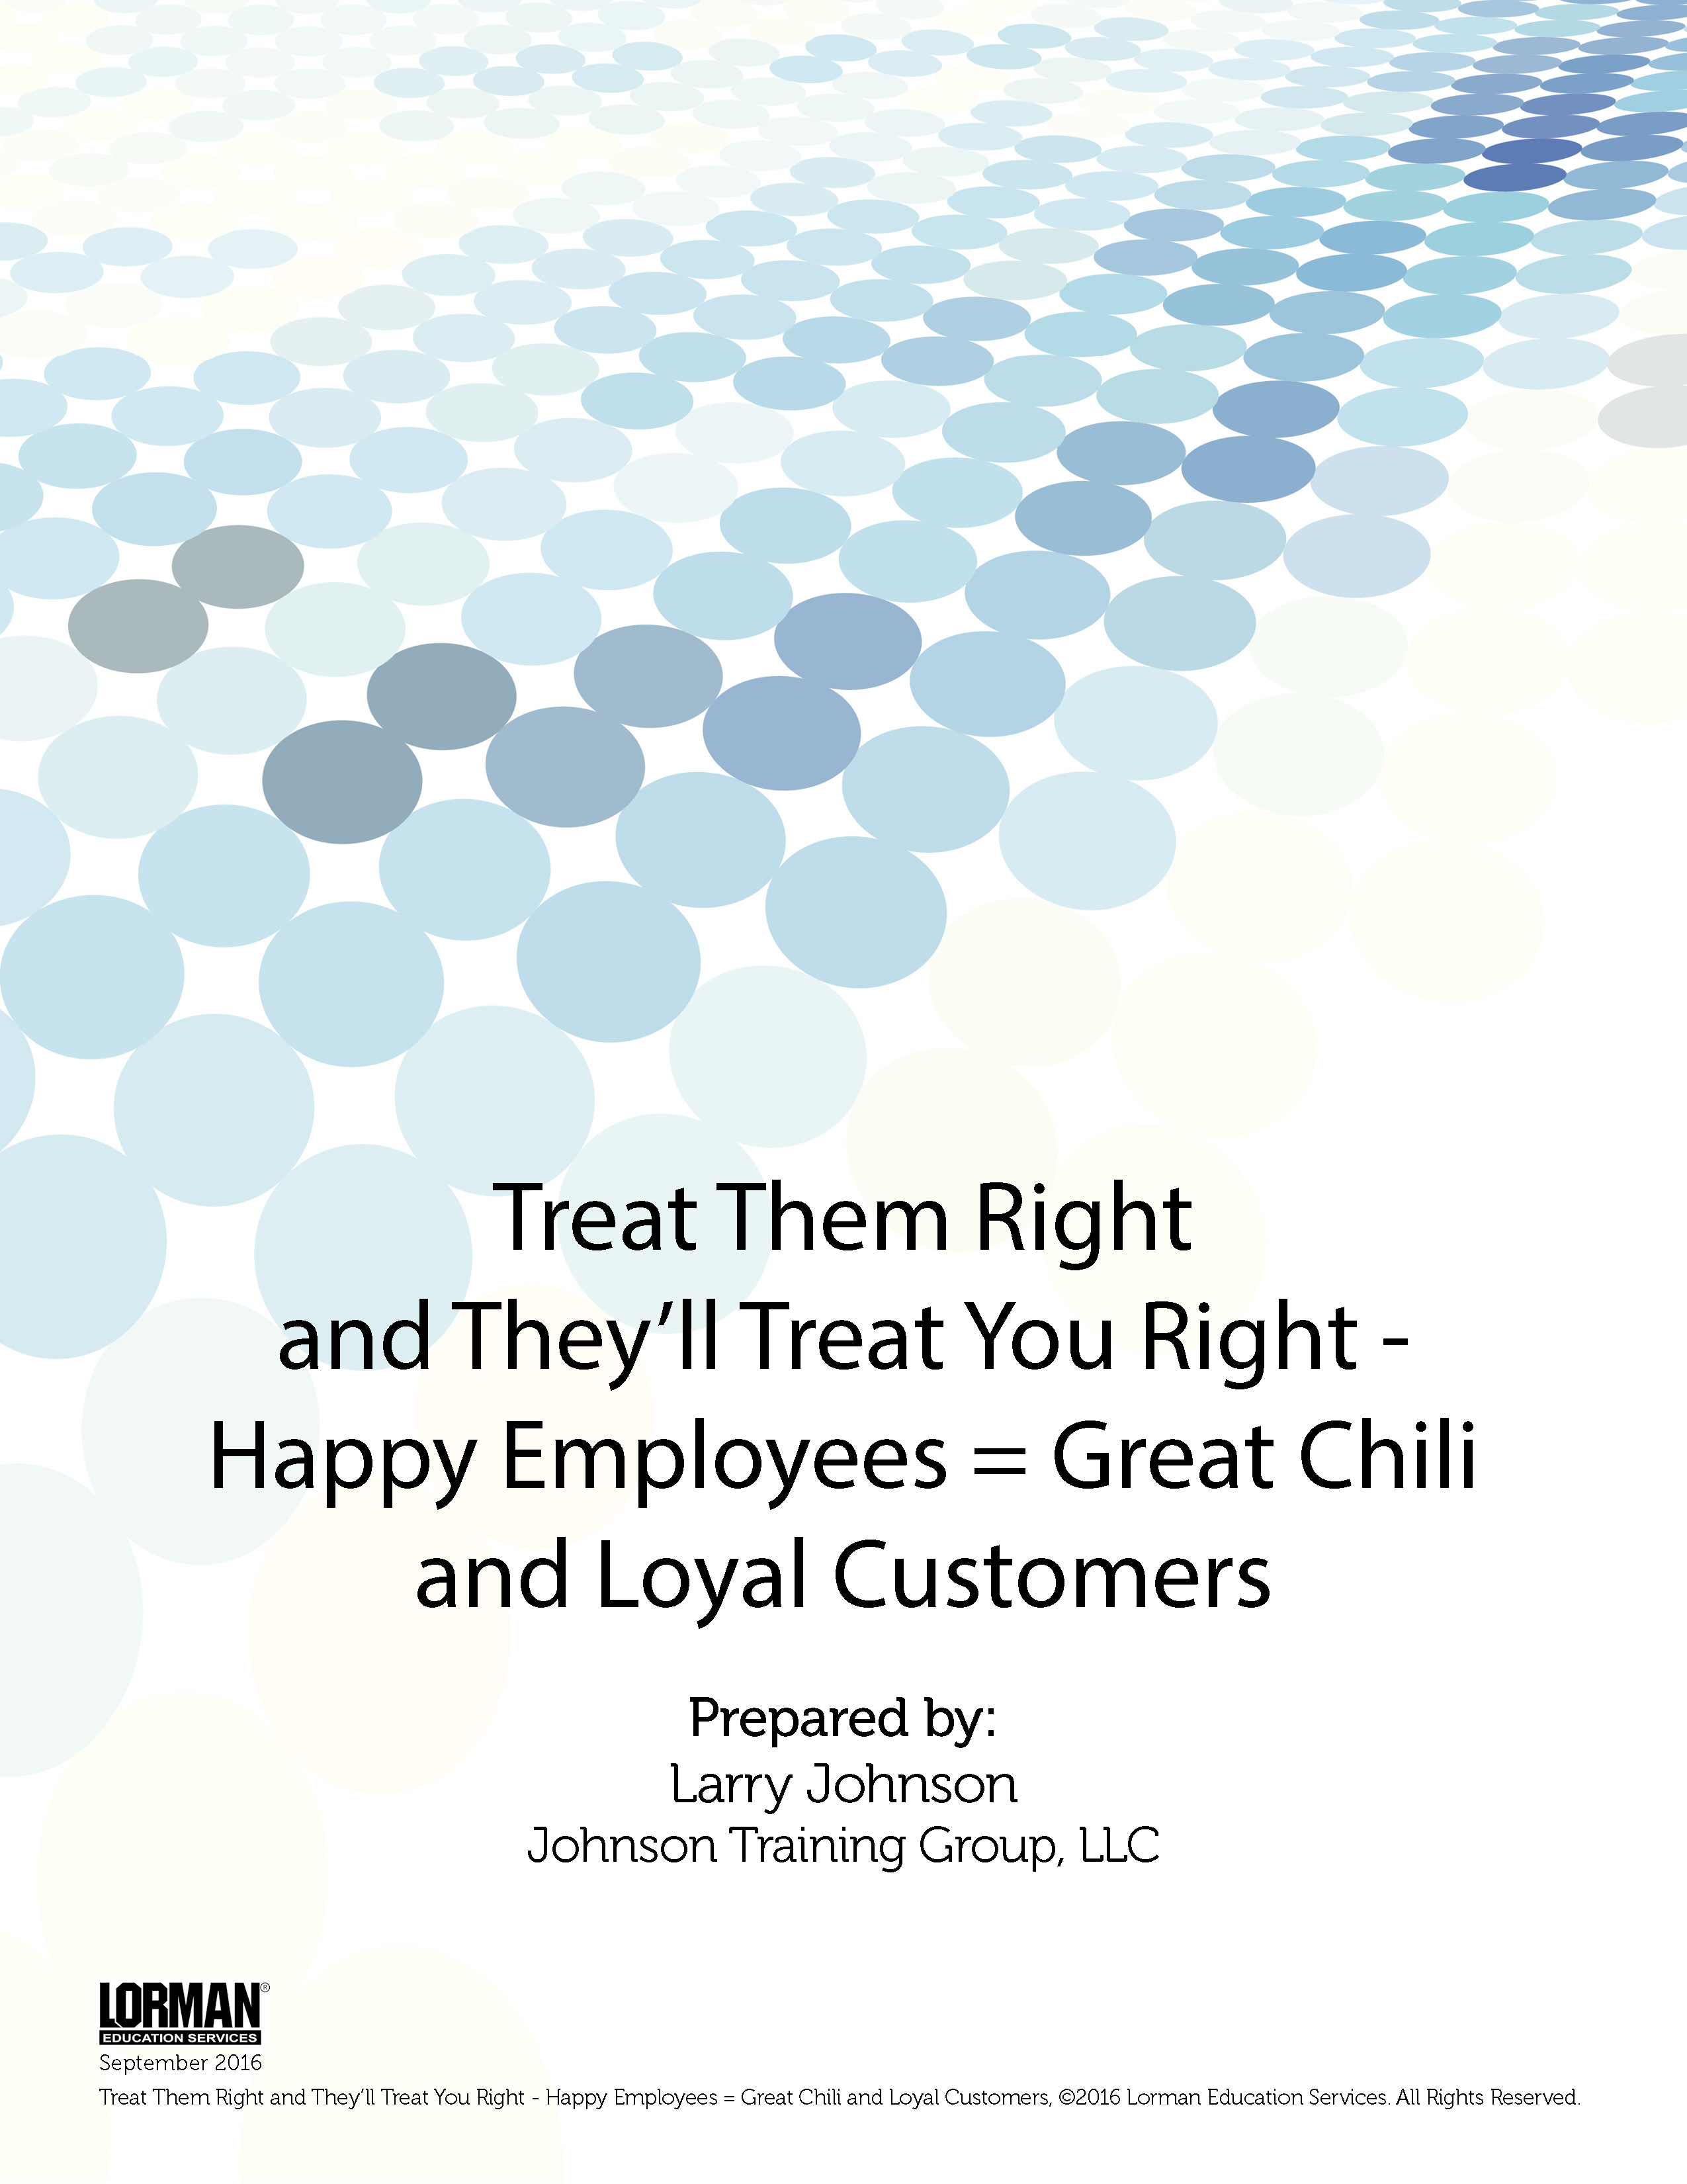 Treat Them Right and They’ll Treat You Right - Happy Employees = Great Chili and Loyal Customers